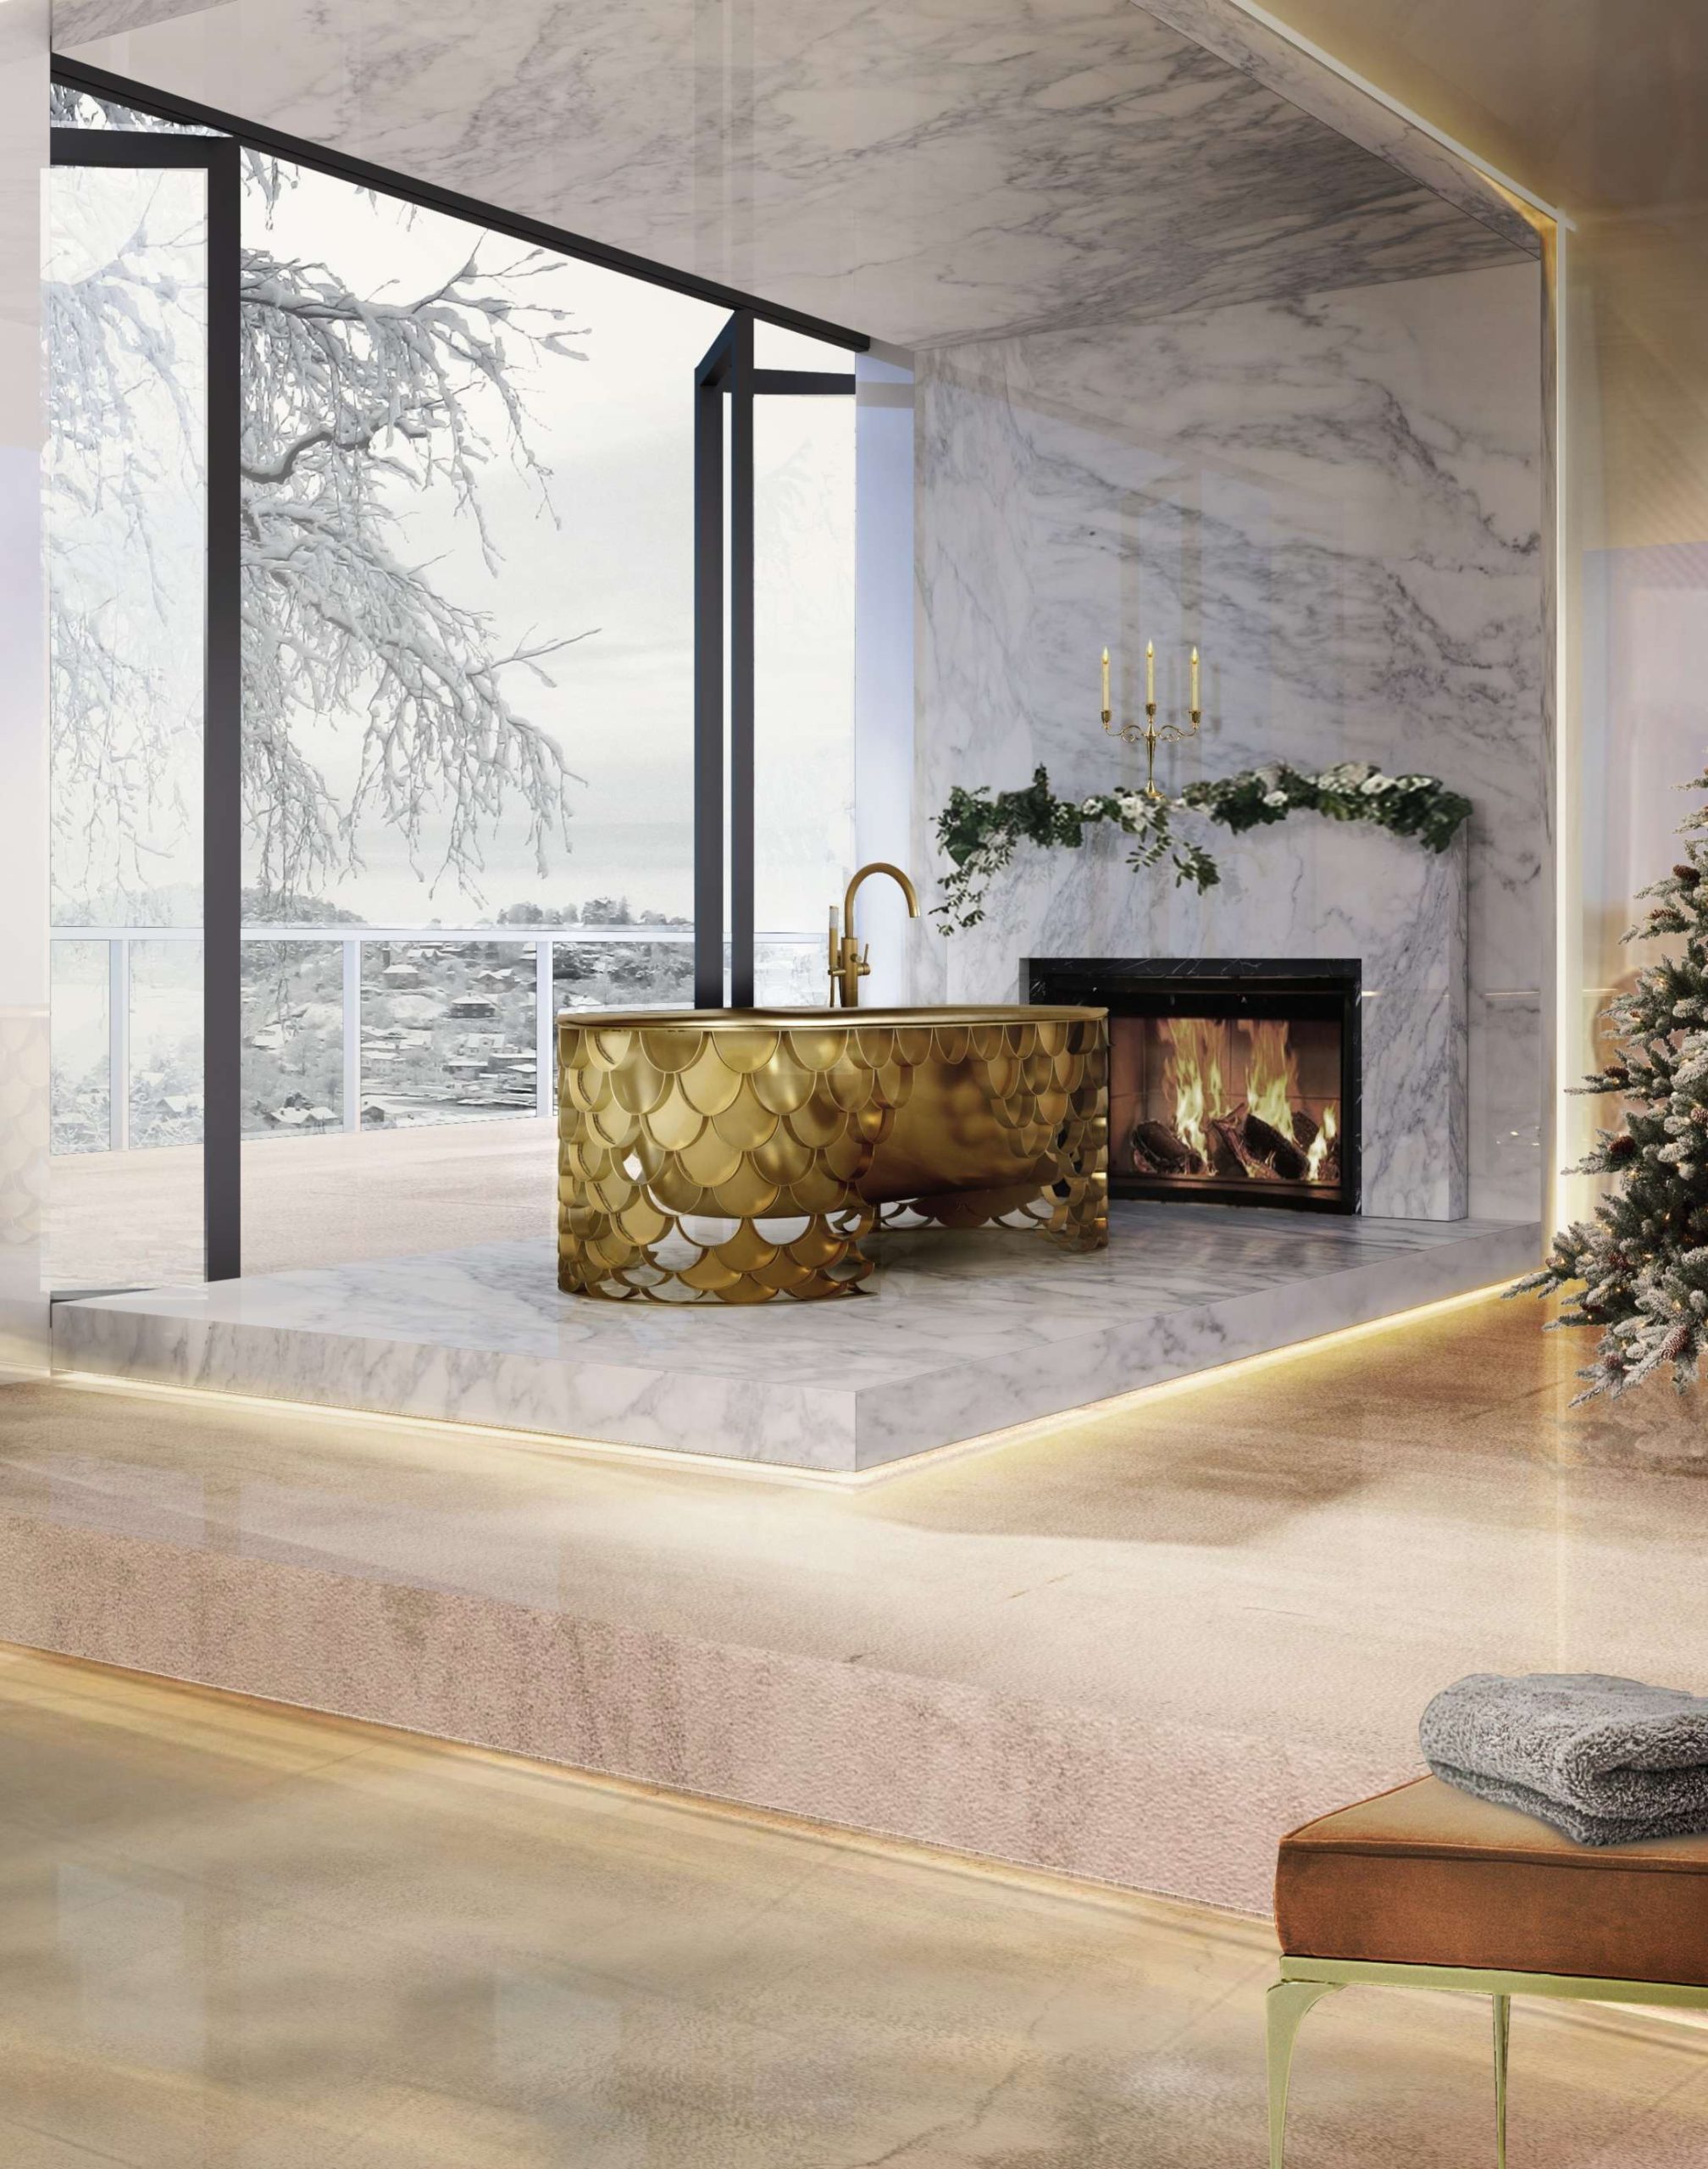 Winter Trends: Why You Should Have a Fireplace in your Bathroom